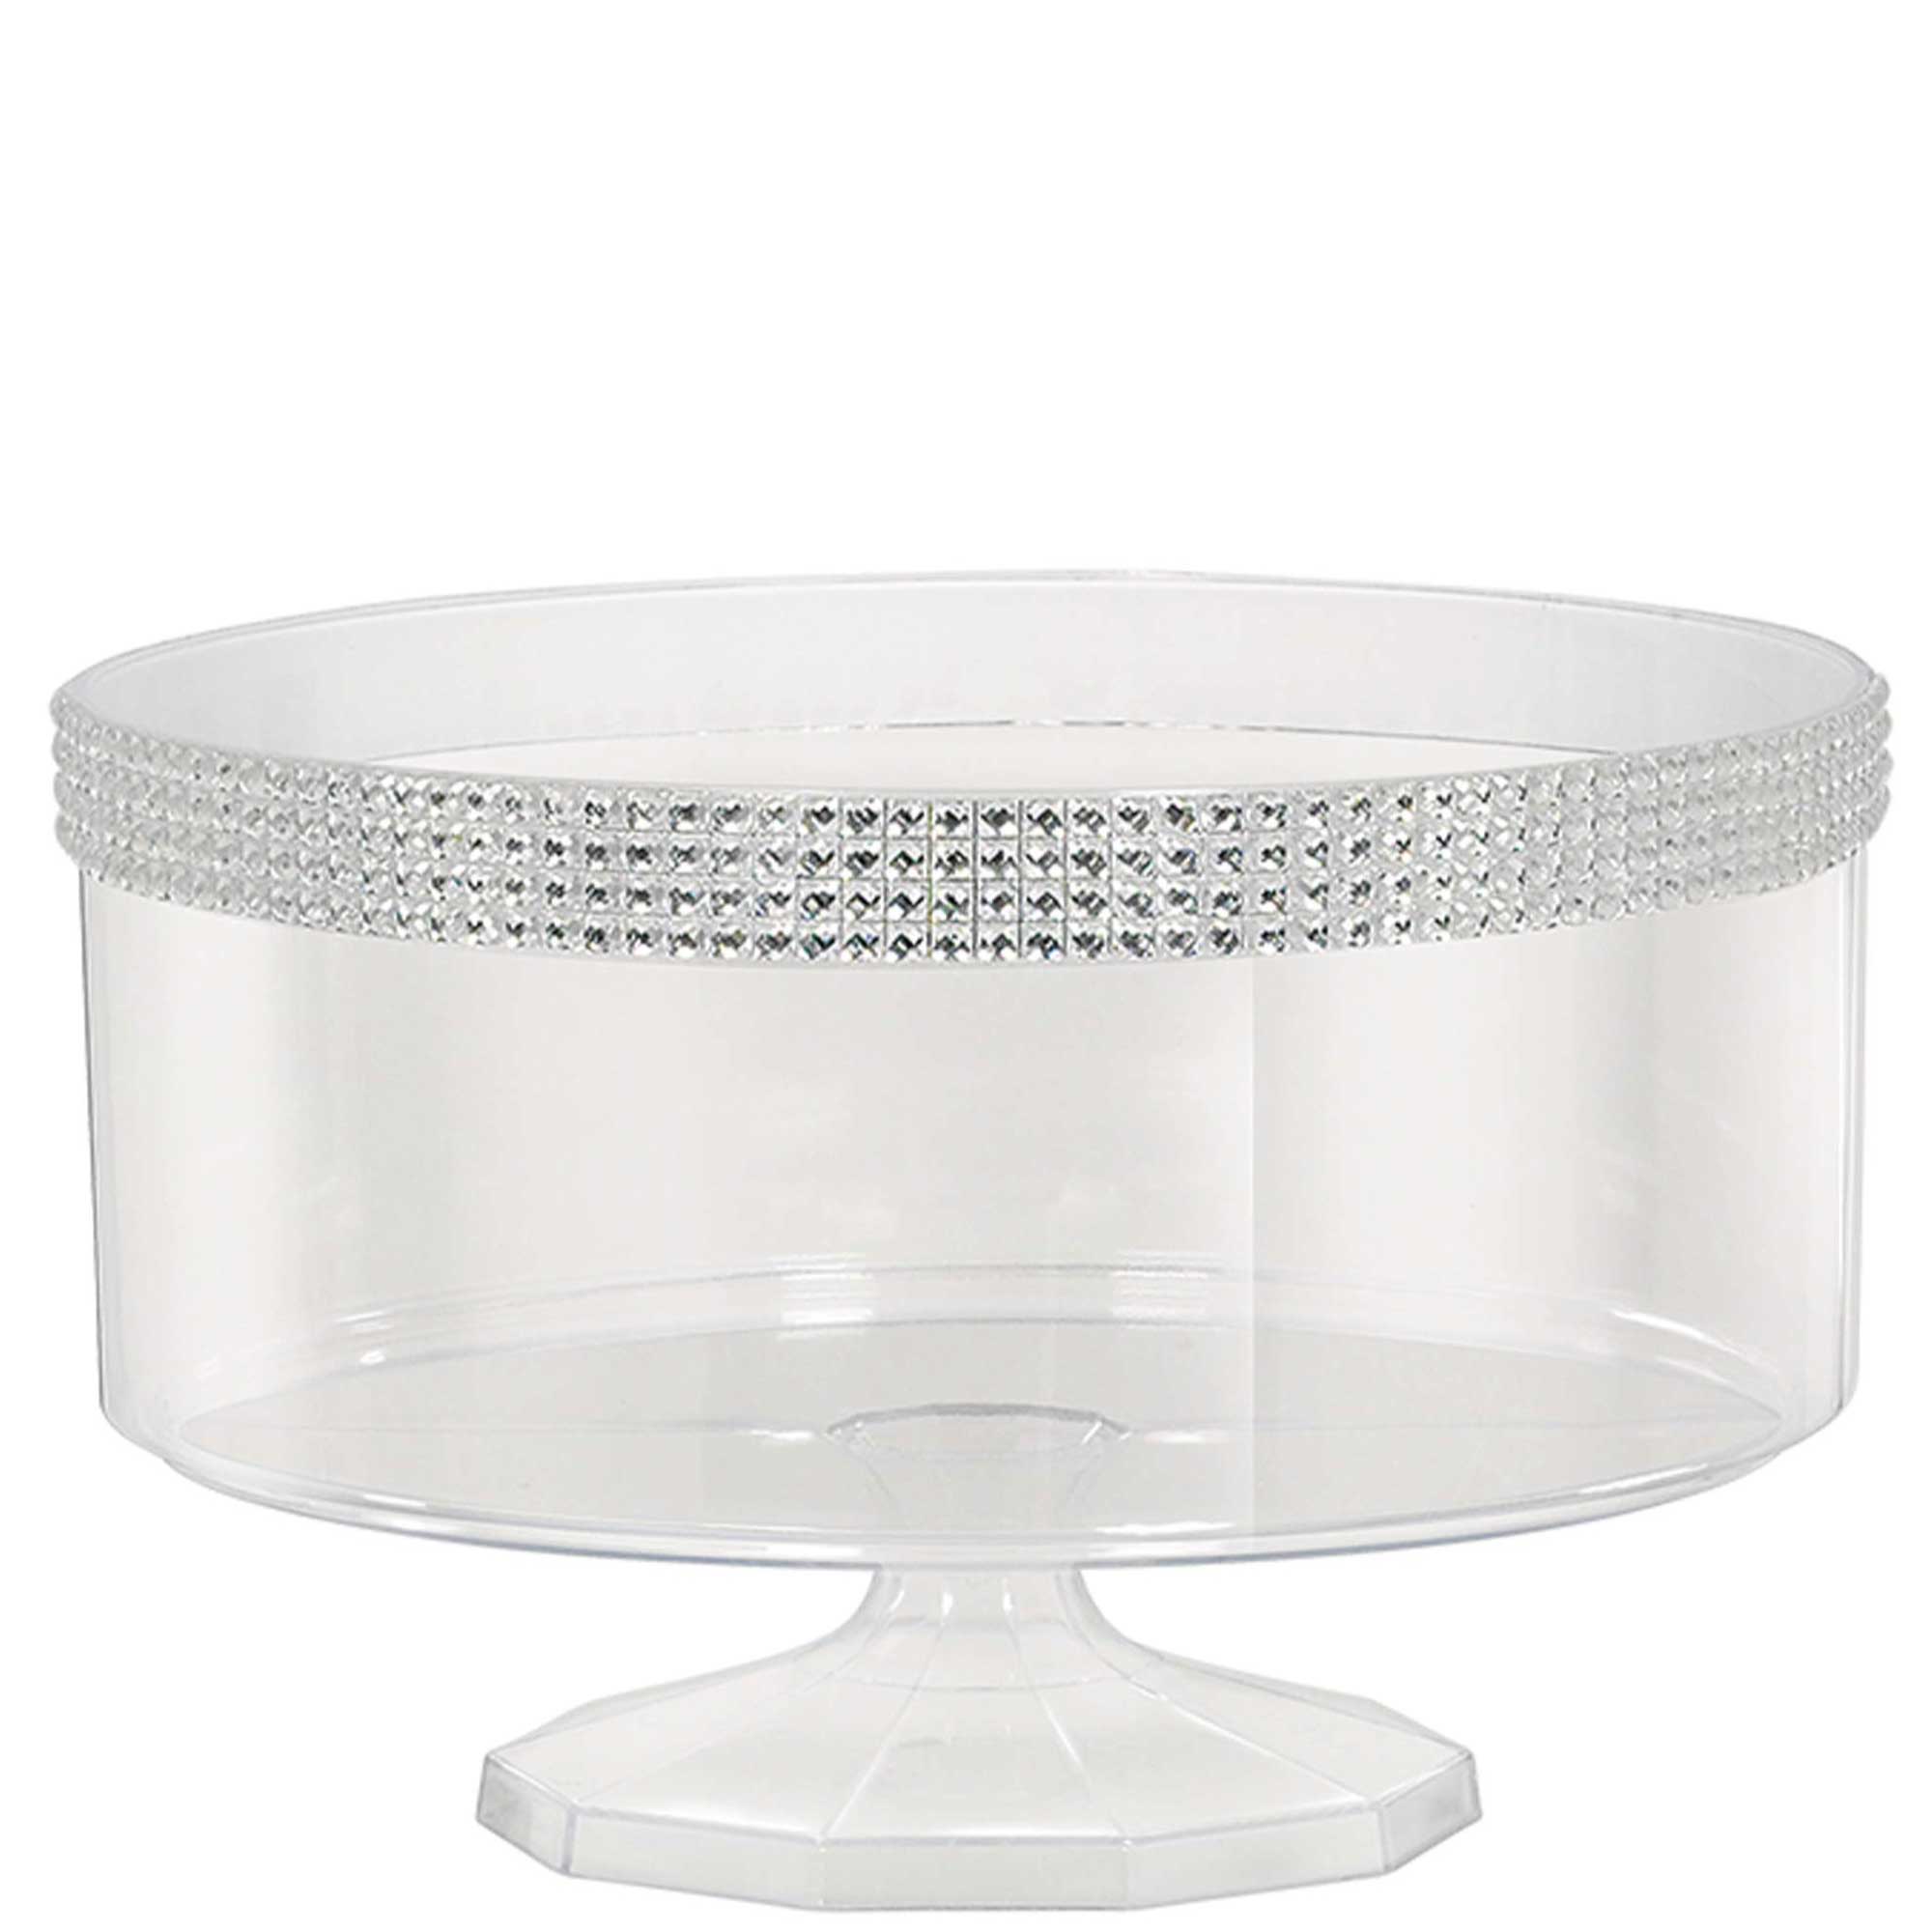 Clear Plastic Small Trifle Container With Silver Gems